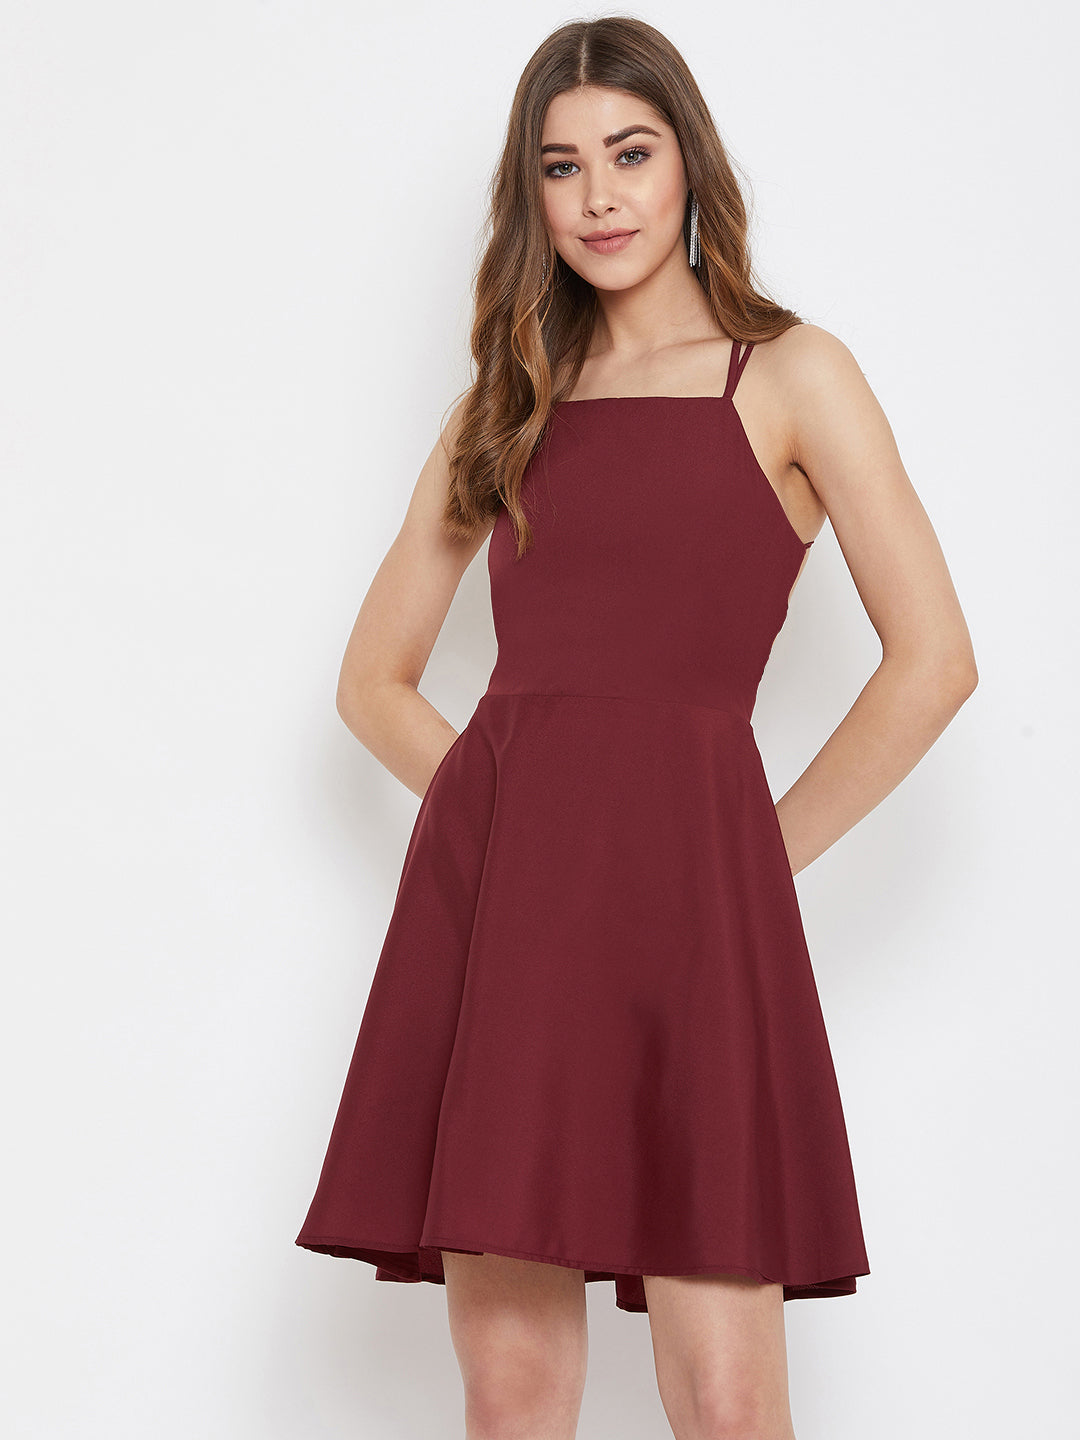 Berrylush Women Solid Maroon Square-Neck Caged Back Tie-Ups Fit & Flare Mini Dress